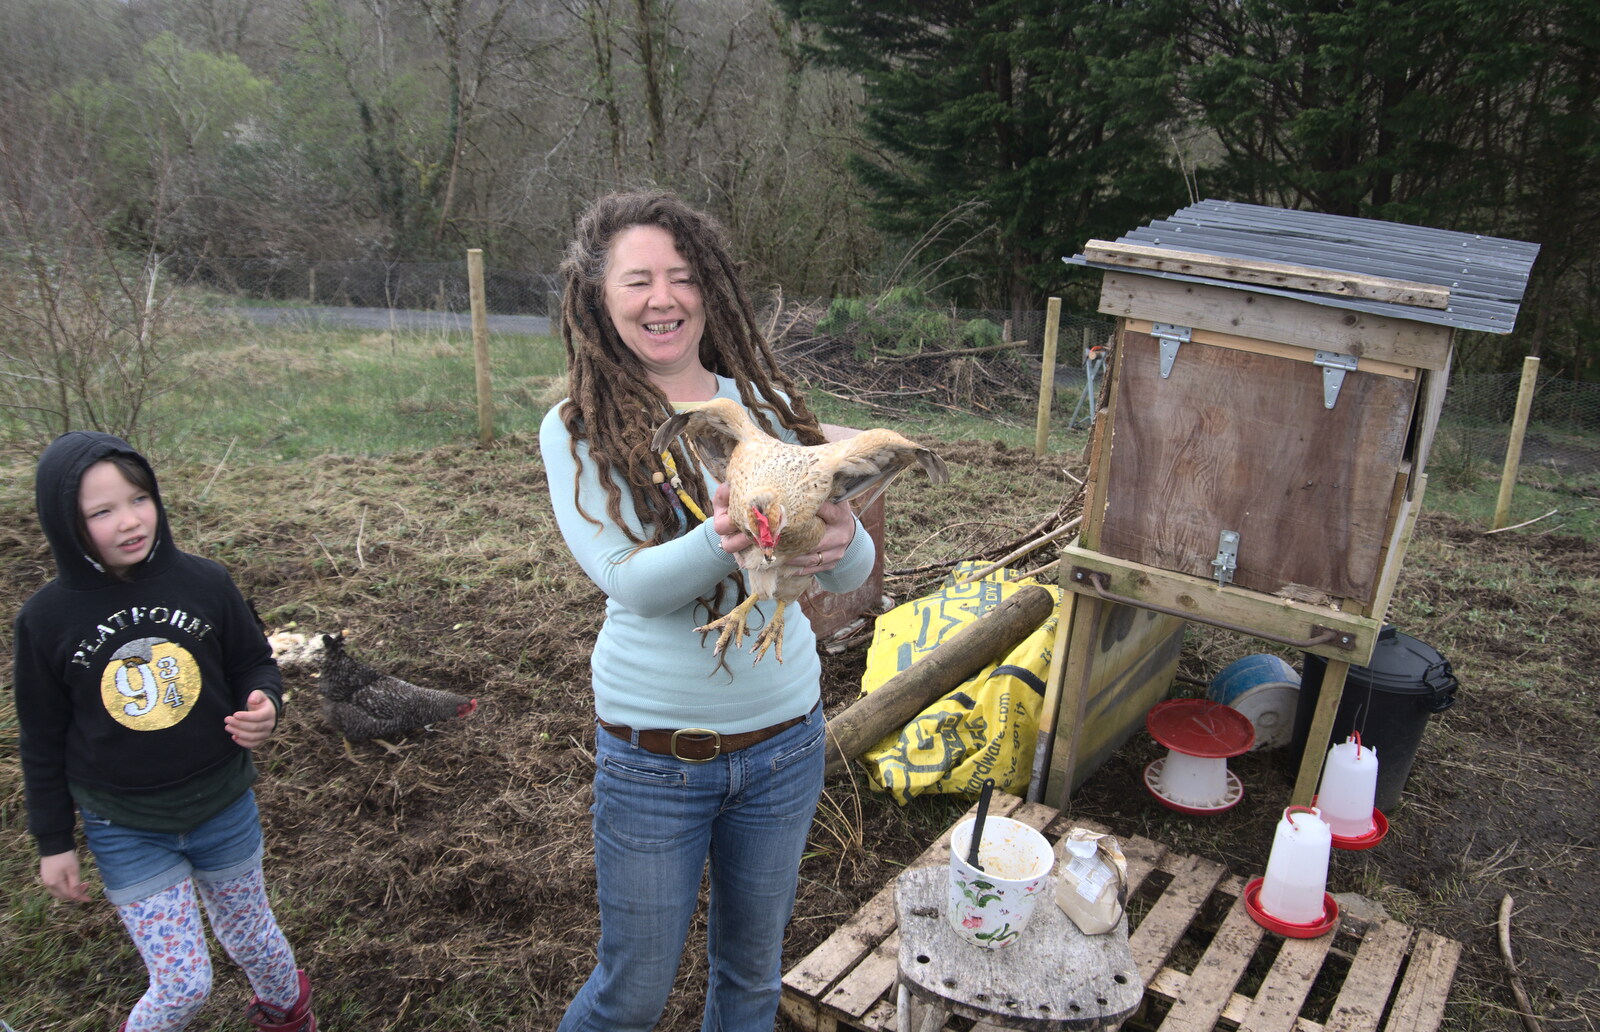 Davida shows us one of the chickens from Manorhamilton and Bundoran, Leitrim and Donegal, Ireland - 16th April 2022